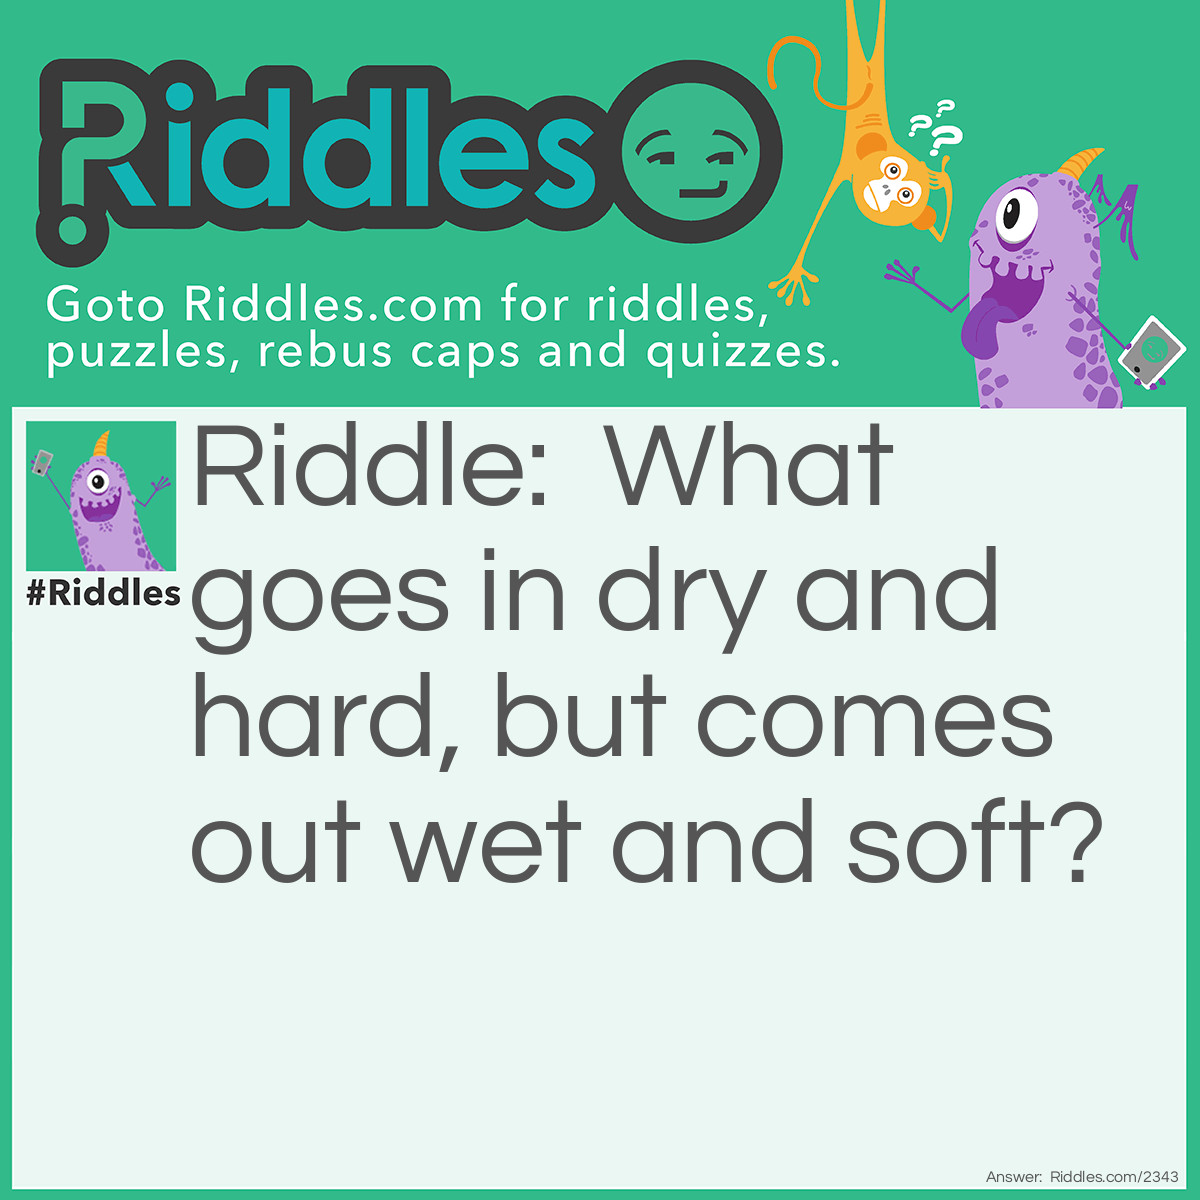 Riddle: What goes in dry and hard, but comes out wet and soft? Answer: Chewing gum, you perv!